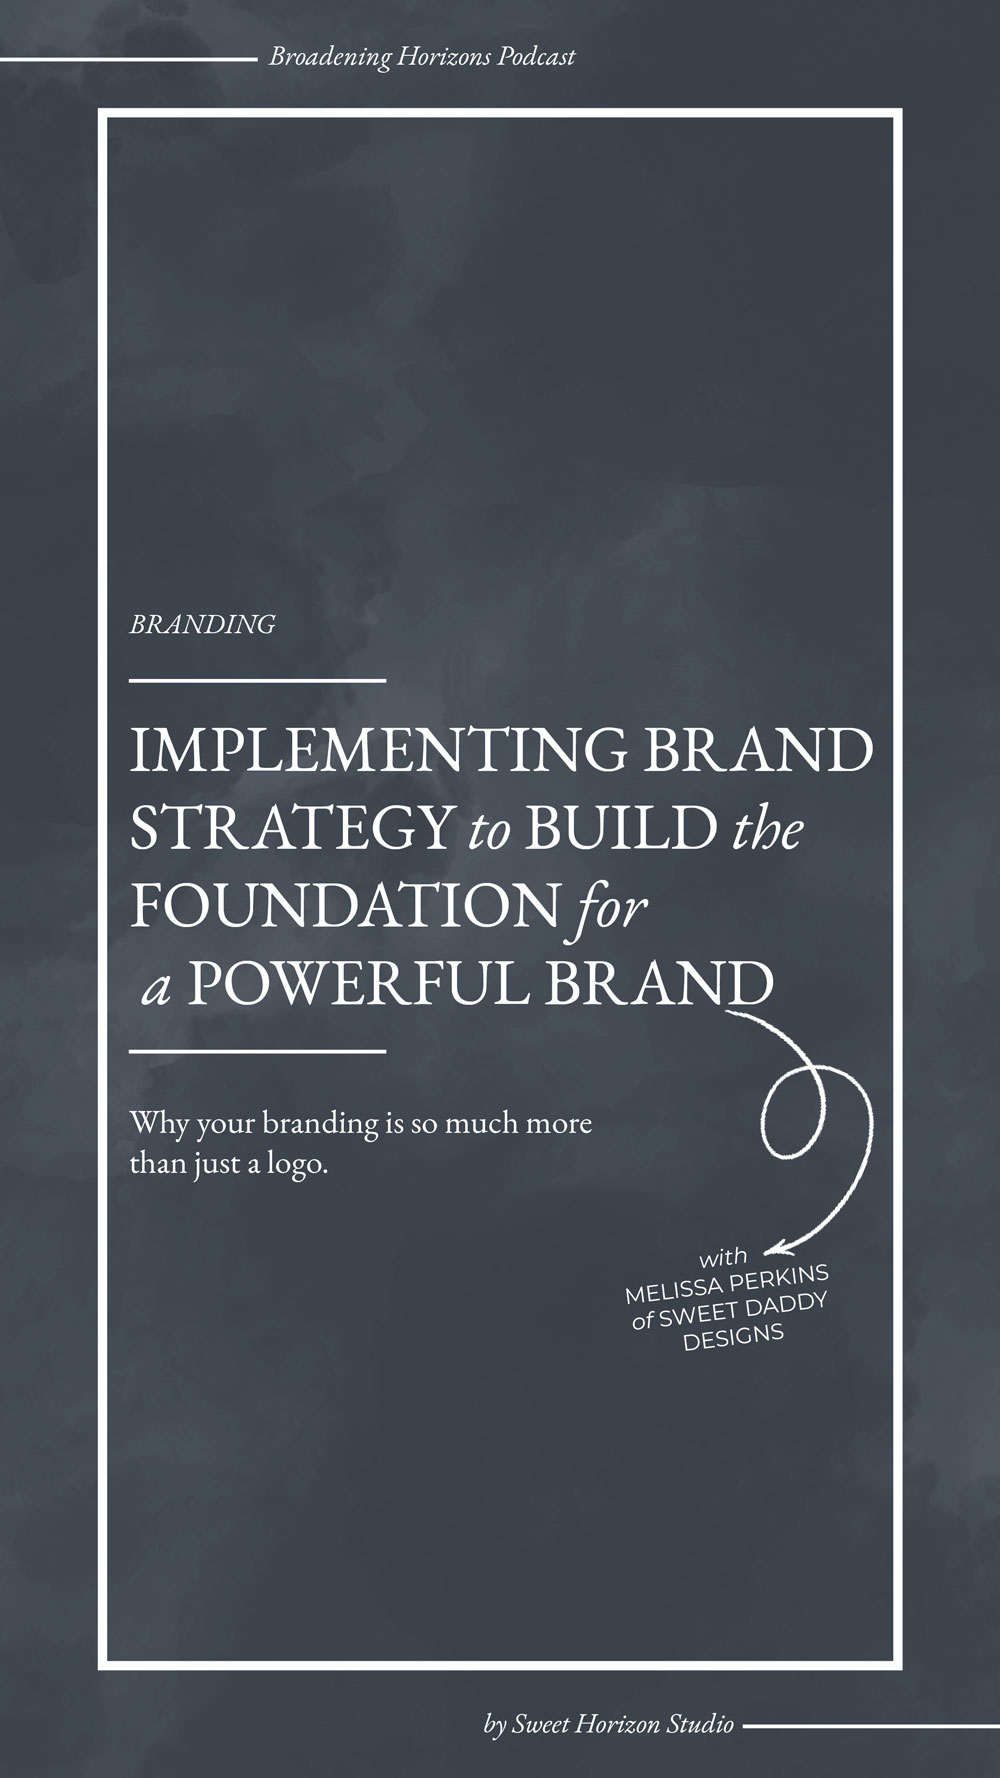 Implementing Brand Strategy to Build the Foundation for a Powerful Brand with Sweet Daddy Designs from www.sweethorizonblog.com